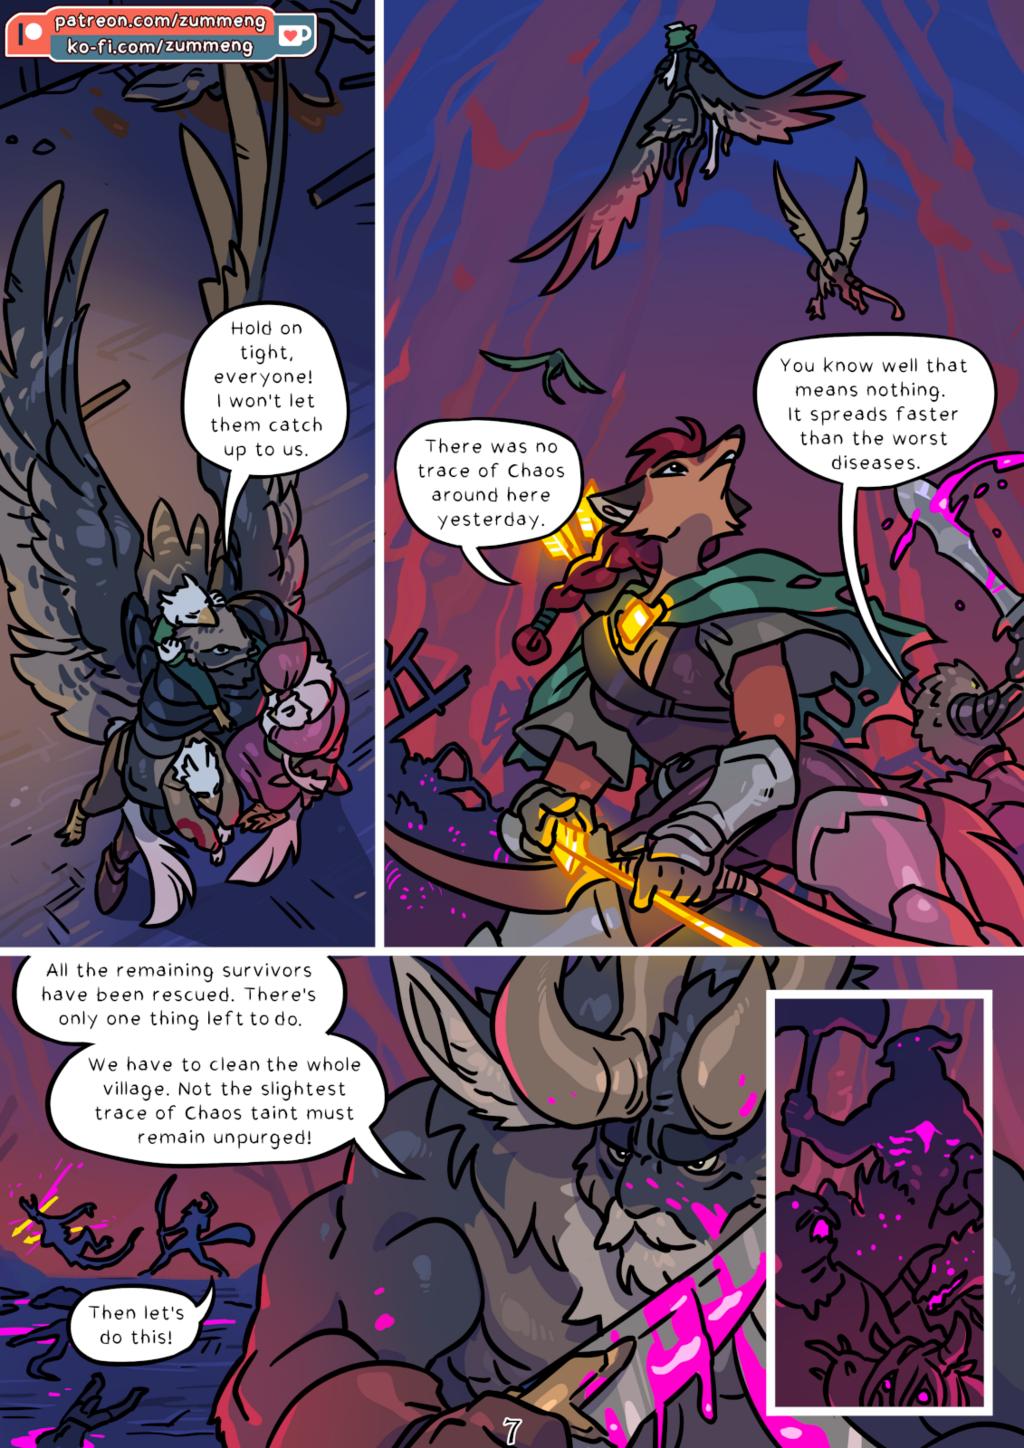 Most recent image: Tree of Life - Book 1 pg. 7.